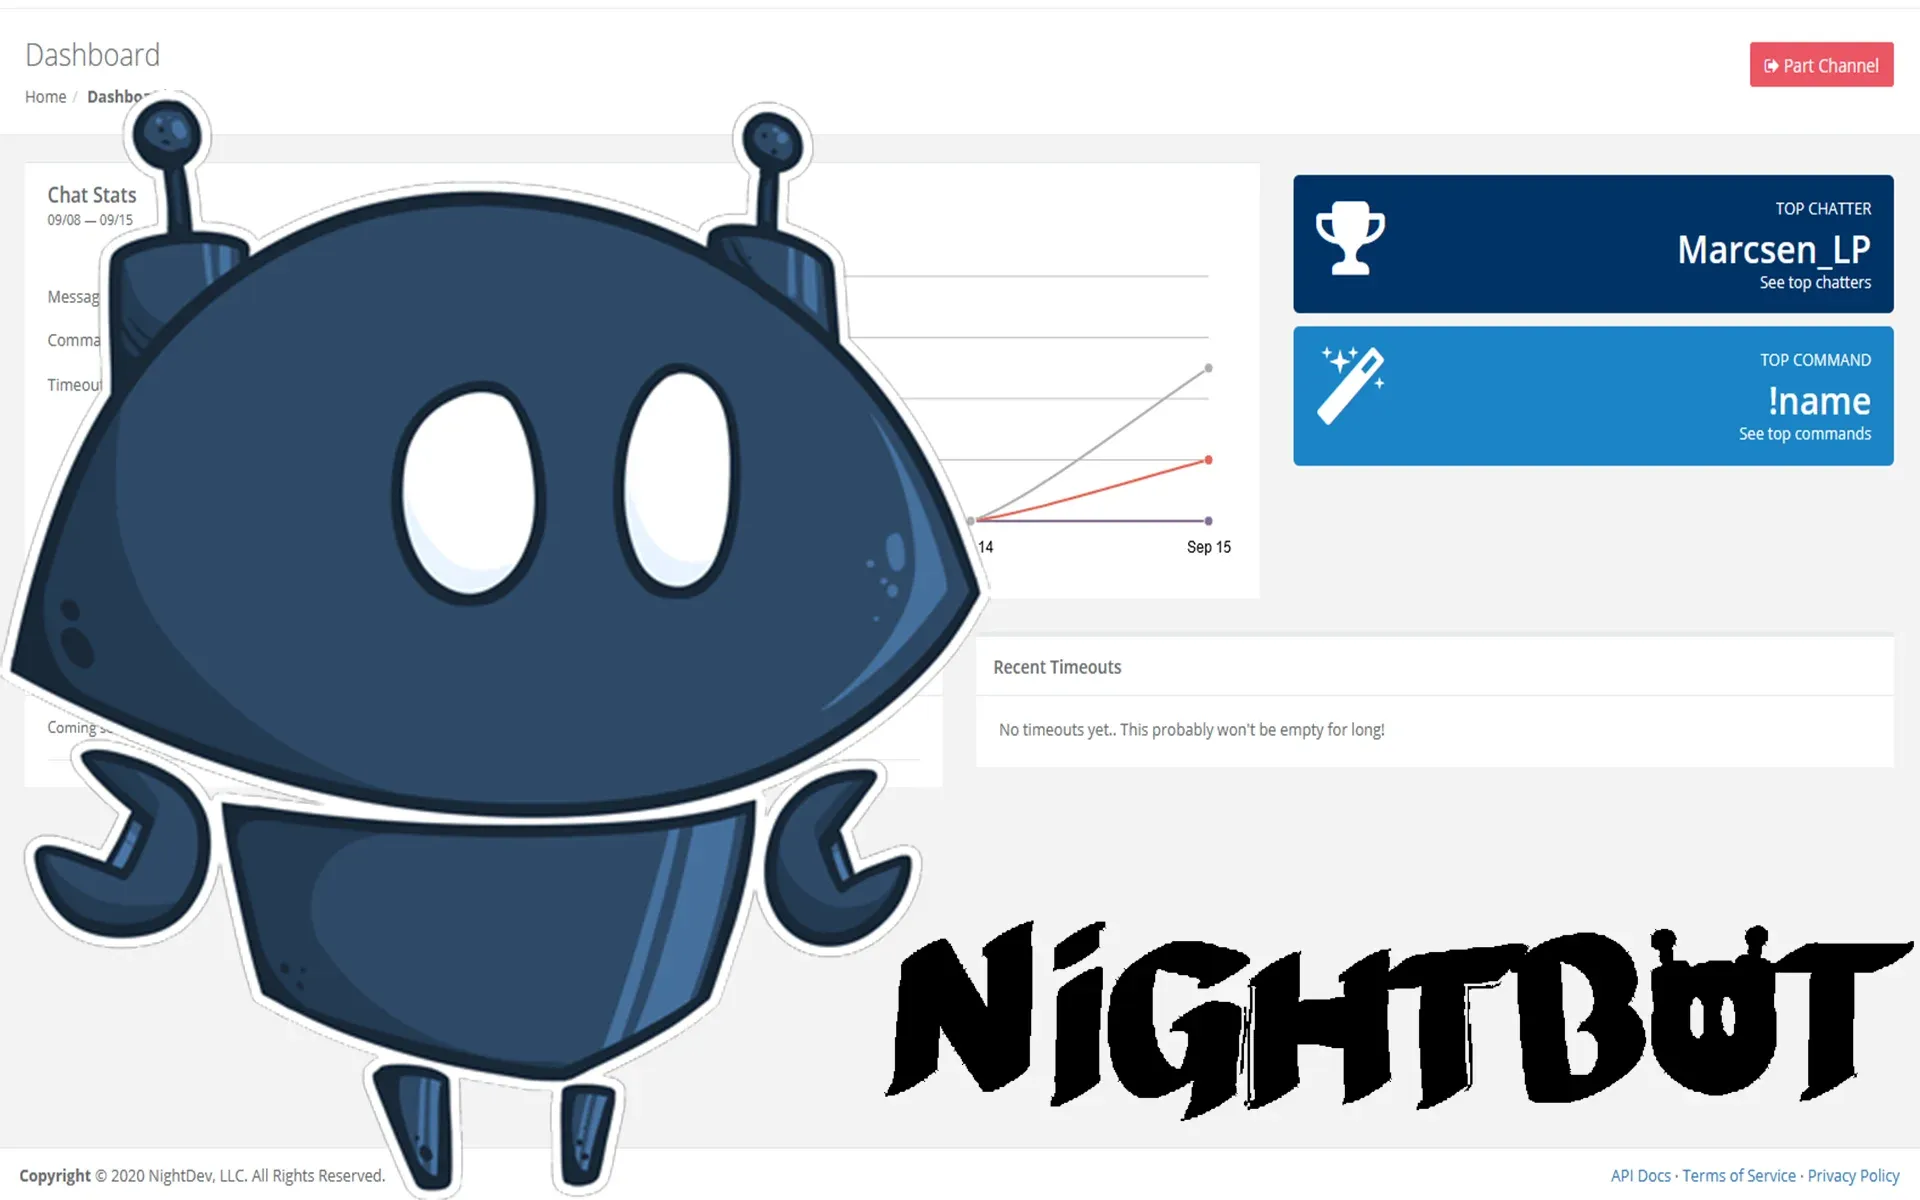 What is Nightbot in Twitch?